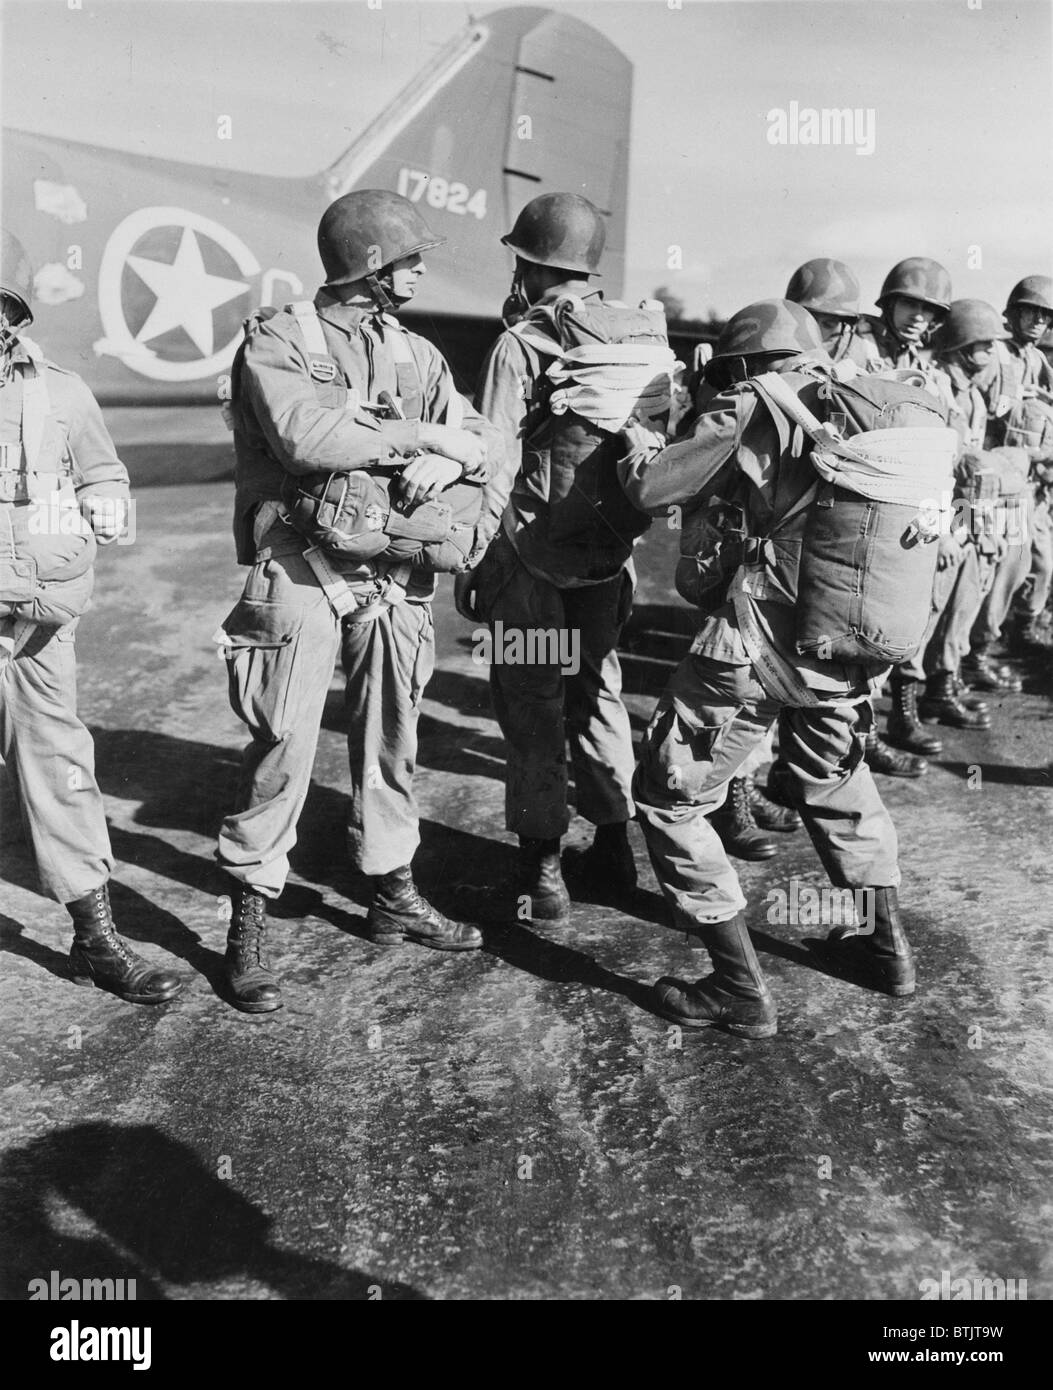 World War II, U.S. paratroopers inspecting parachutes before taking off on maneuvers in England, circa 1942. Stock Photo